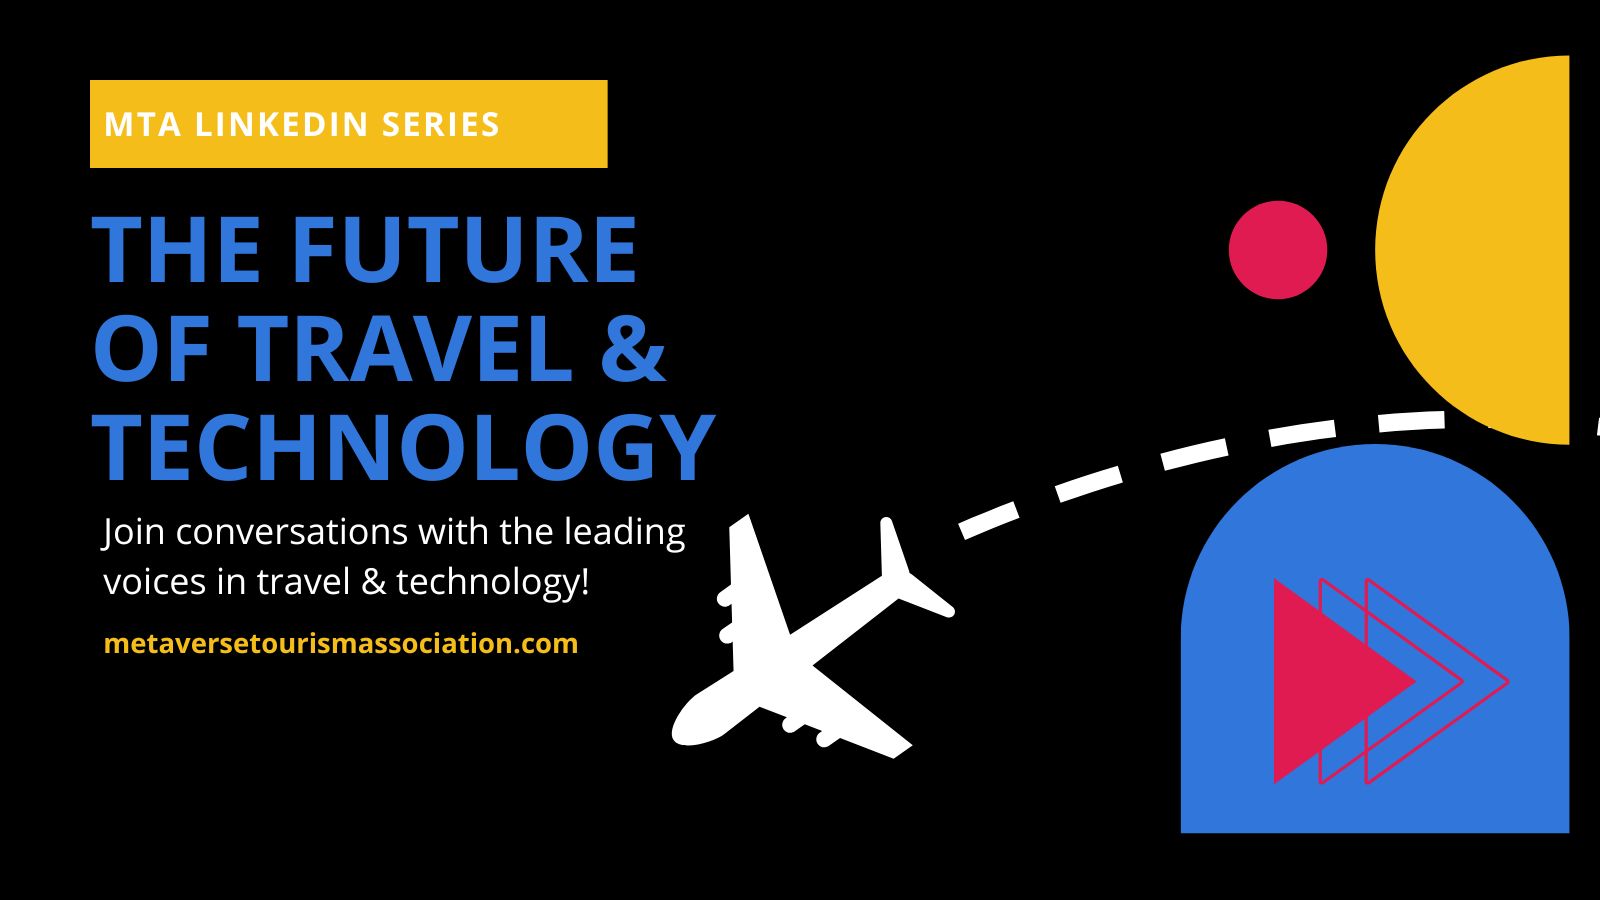 LinkedIn Live: The Future of Travel & Technology Series